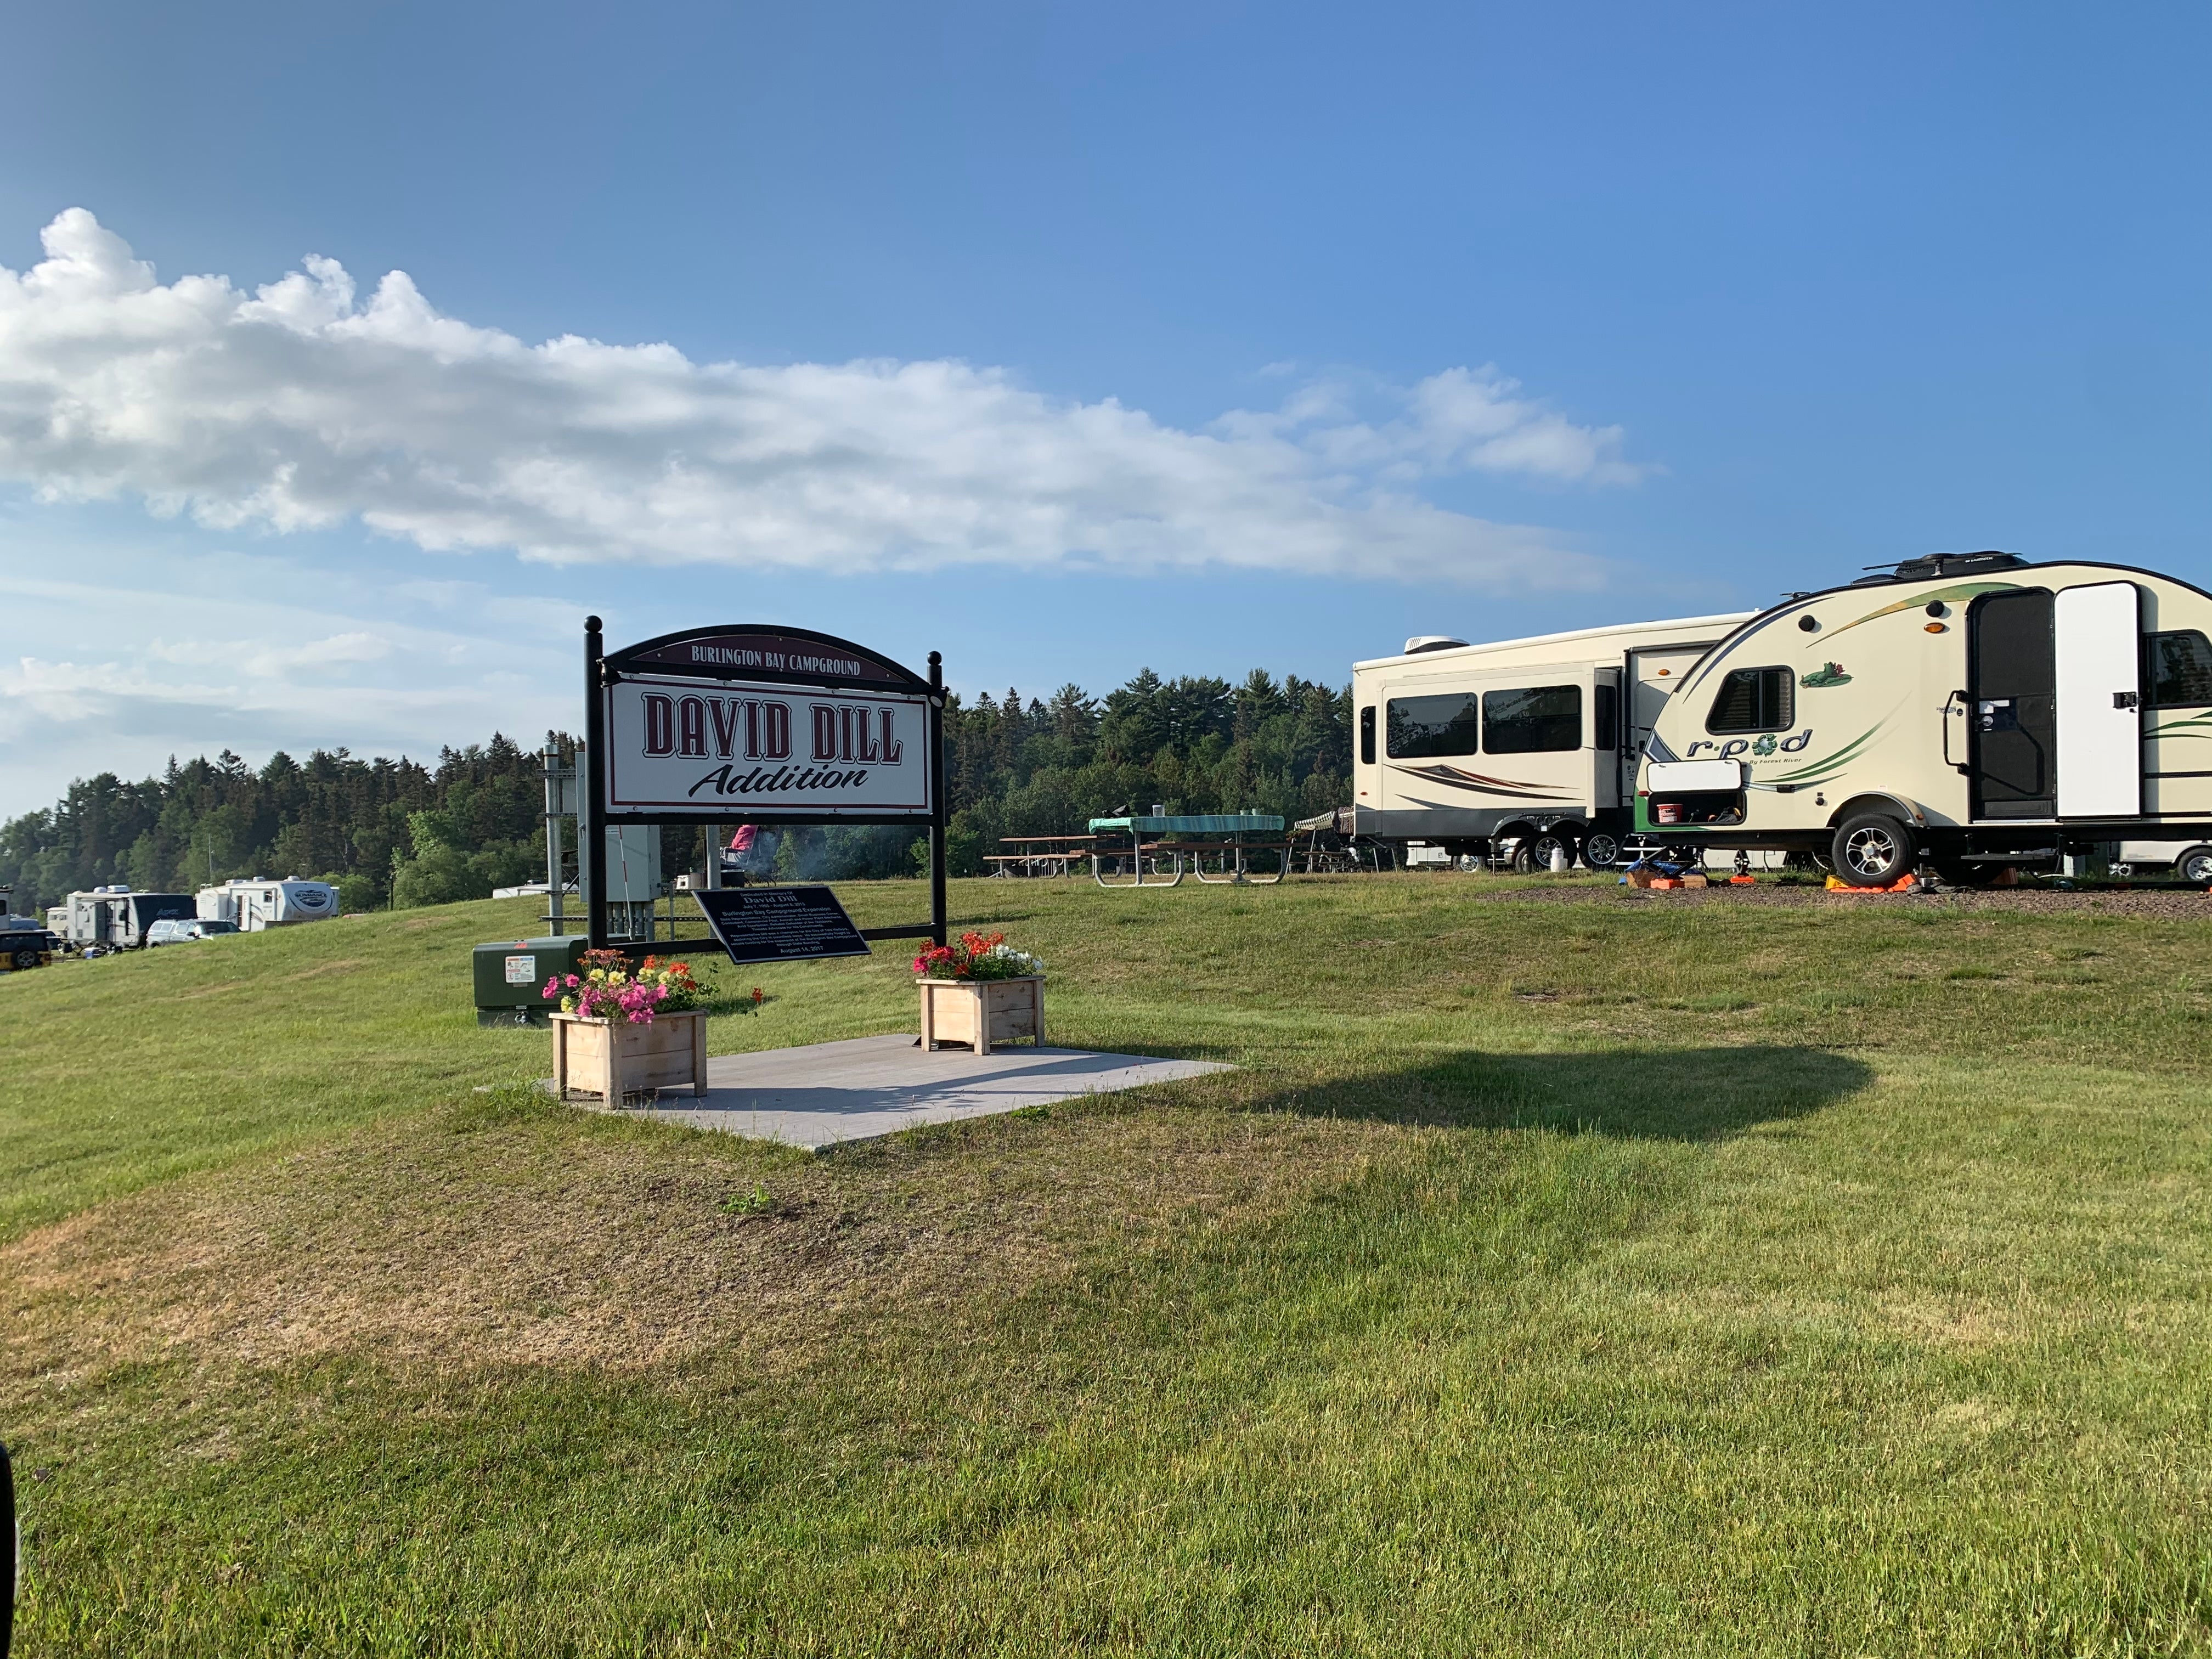 Camper submitted image from City of Two Harbors Burlington BayCampground David Hill Addition  - 1